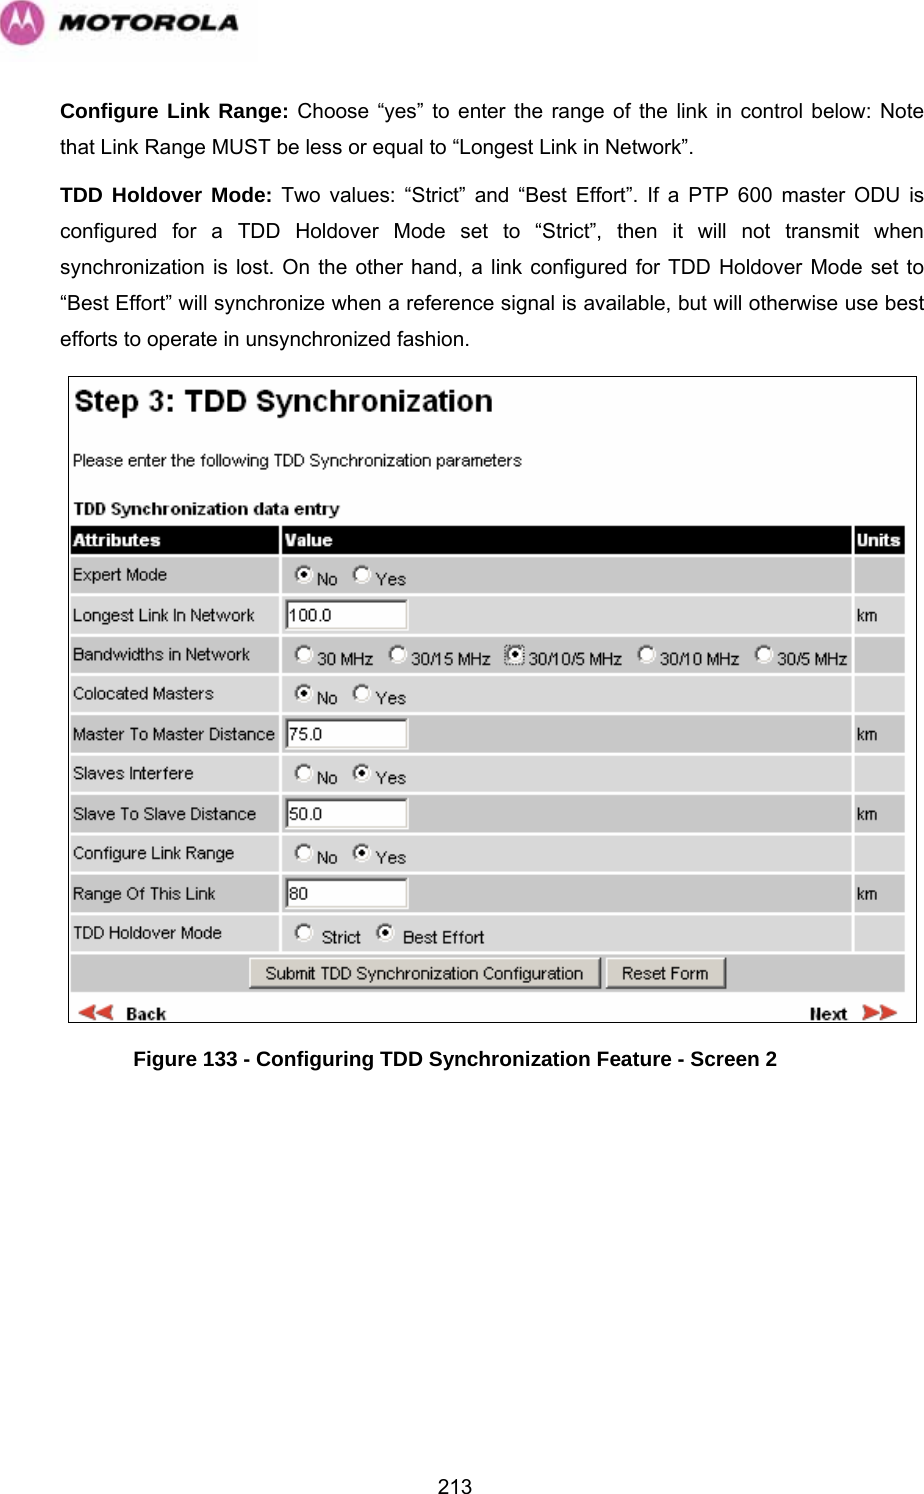   213Configure Link Range: Choose “yes” to enter the range of the link in control below: Note that Link Range MUST be less or equal to “Longest Link in Network”. TDD Holdover Mode: Two values: “Strict” and “Best Effort”. If a PTP 600 master ODU is configured for a TDD Holdover Mode set to “Strict”, then it will not transmit when synchronization is lost. On the other hand, a link configured for TDD Holdover Mode set to “Best Effort” will synchronize when a reference signal is available, but will otherwise use best efforts to operate in unsynchronized fashion.  Figure 133 - Configuring TDD Synchronization Feature - Screen 2  